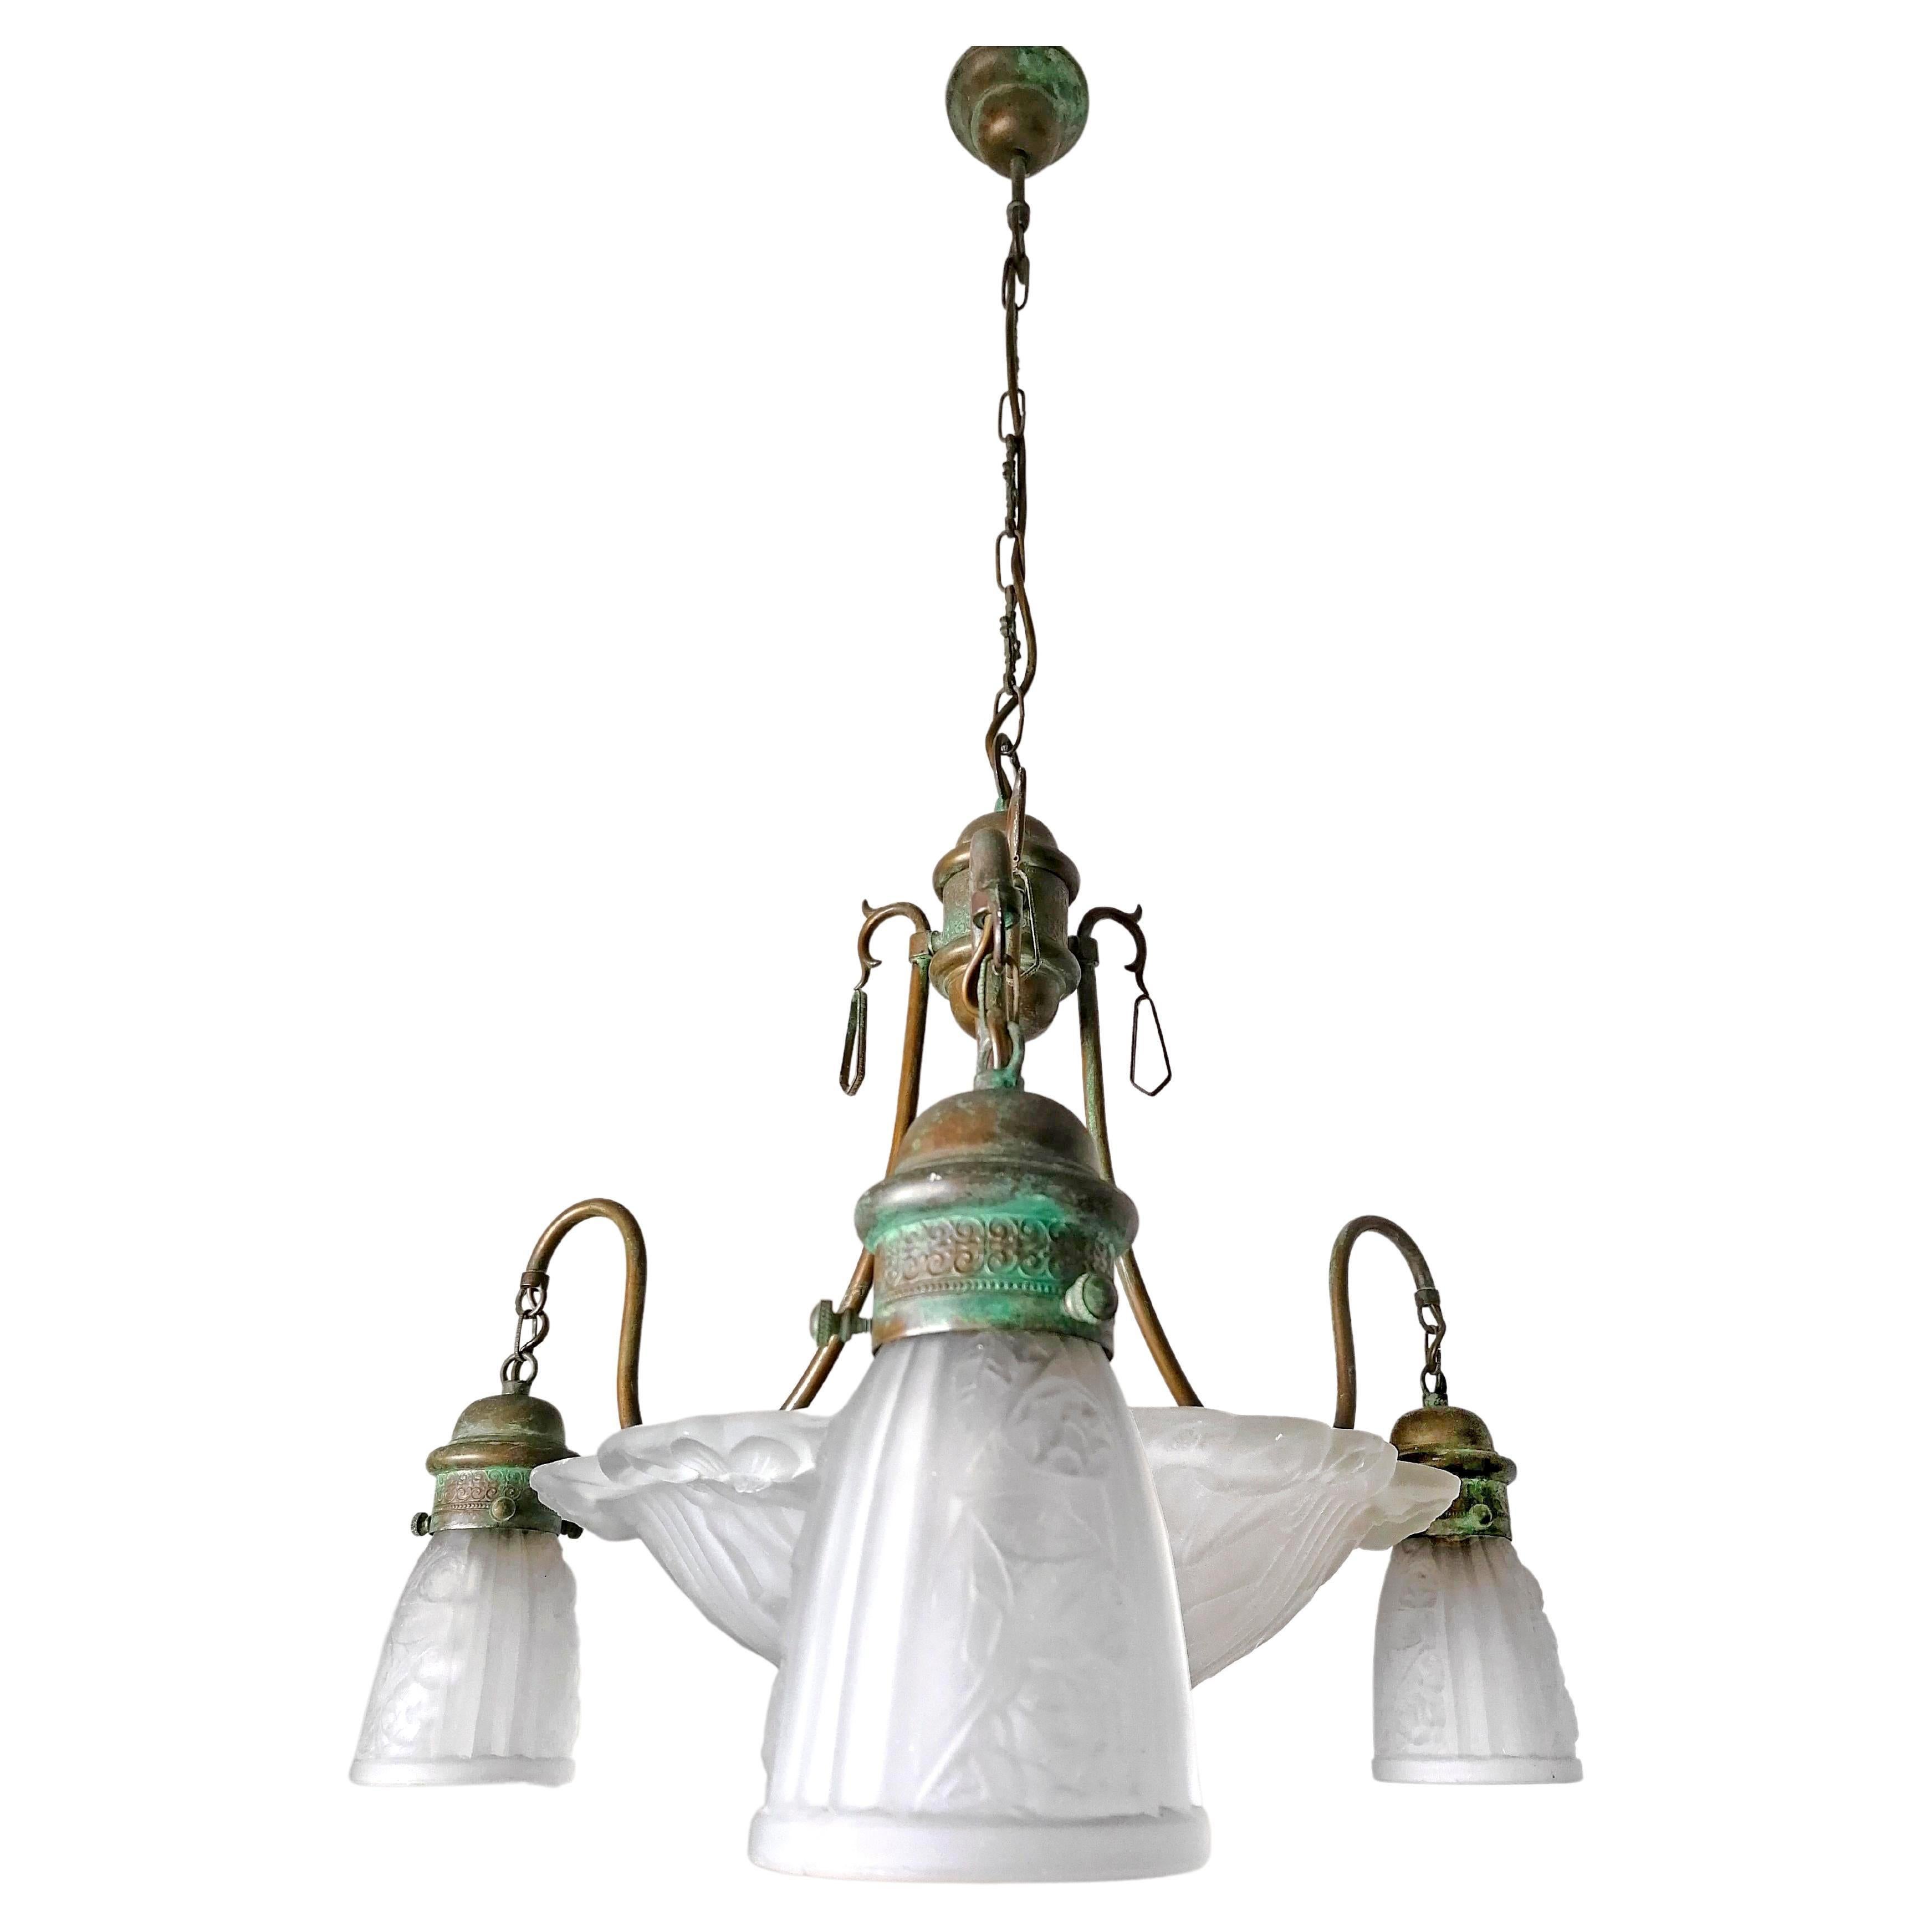 French Art Deco Art Nouveau Frosted Glass and Brass Chandelier For Sale 1